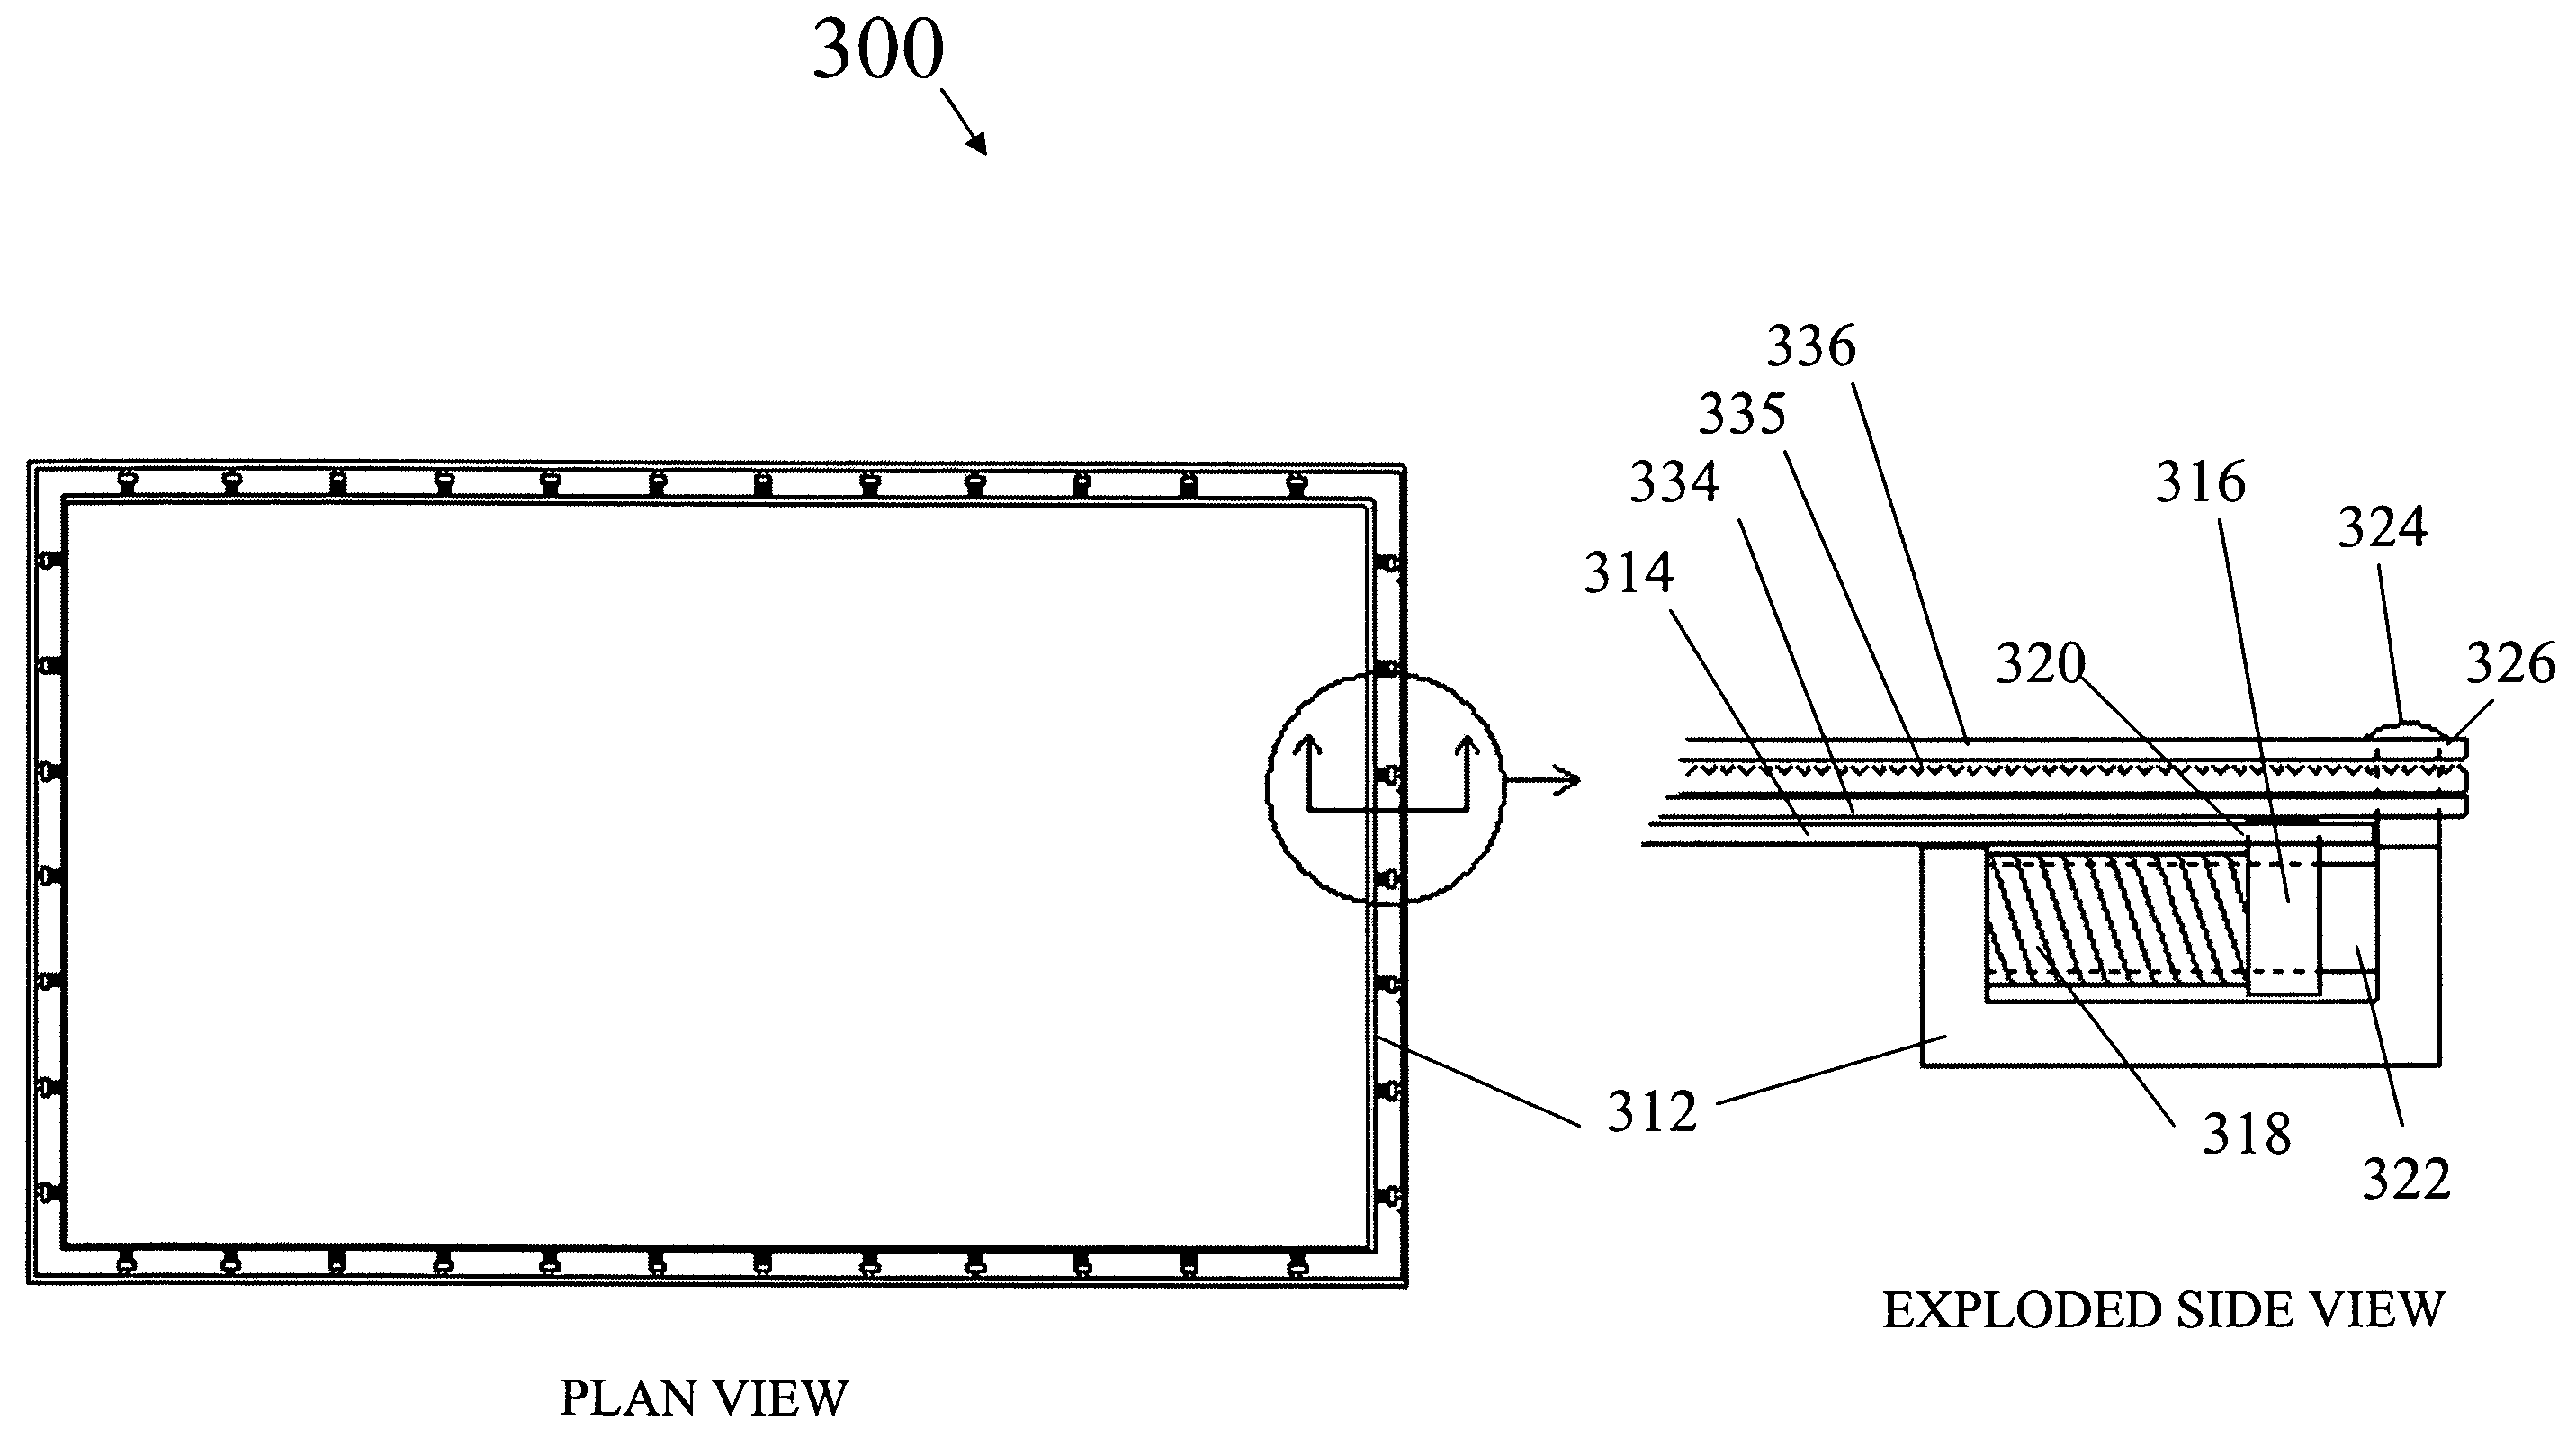 Optical element comprising restrained asymmetrical diffuser